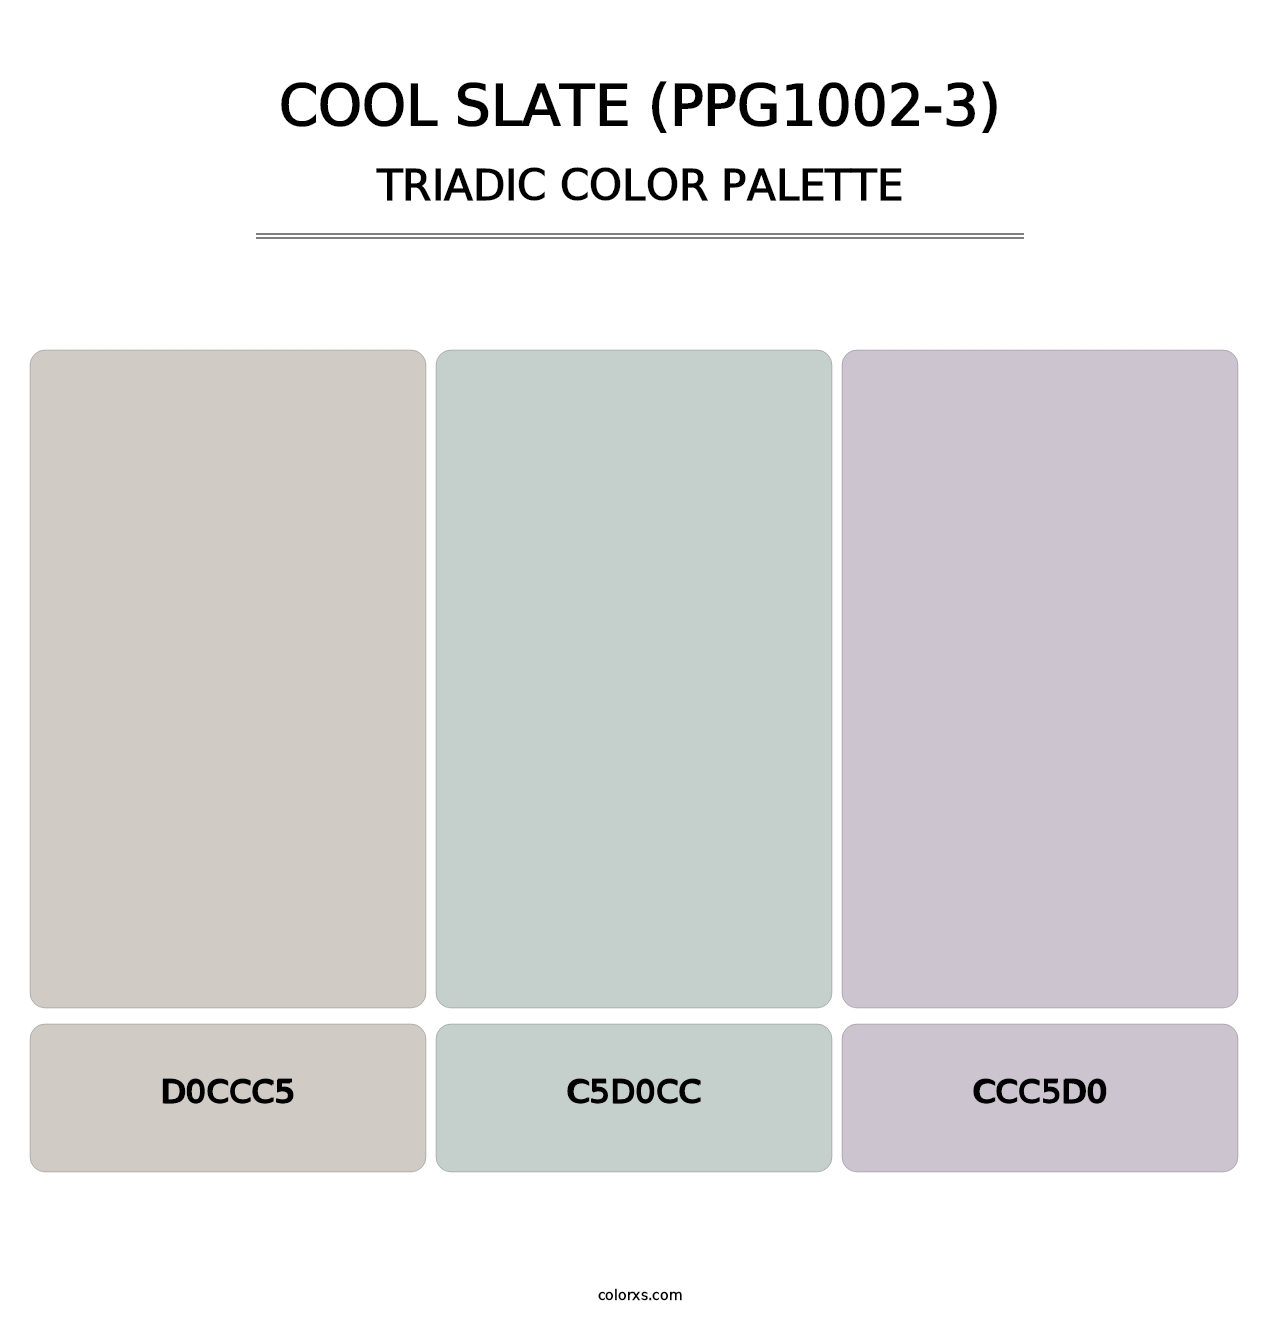 Cool Slate (PPG1002-3) - Triadic Color Palette